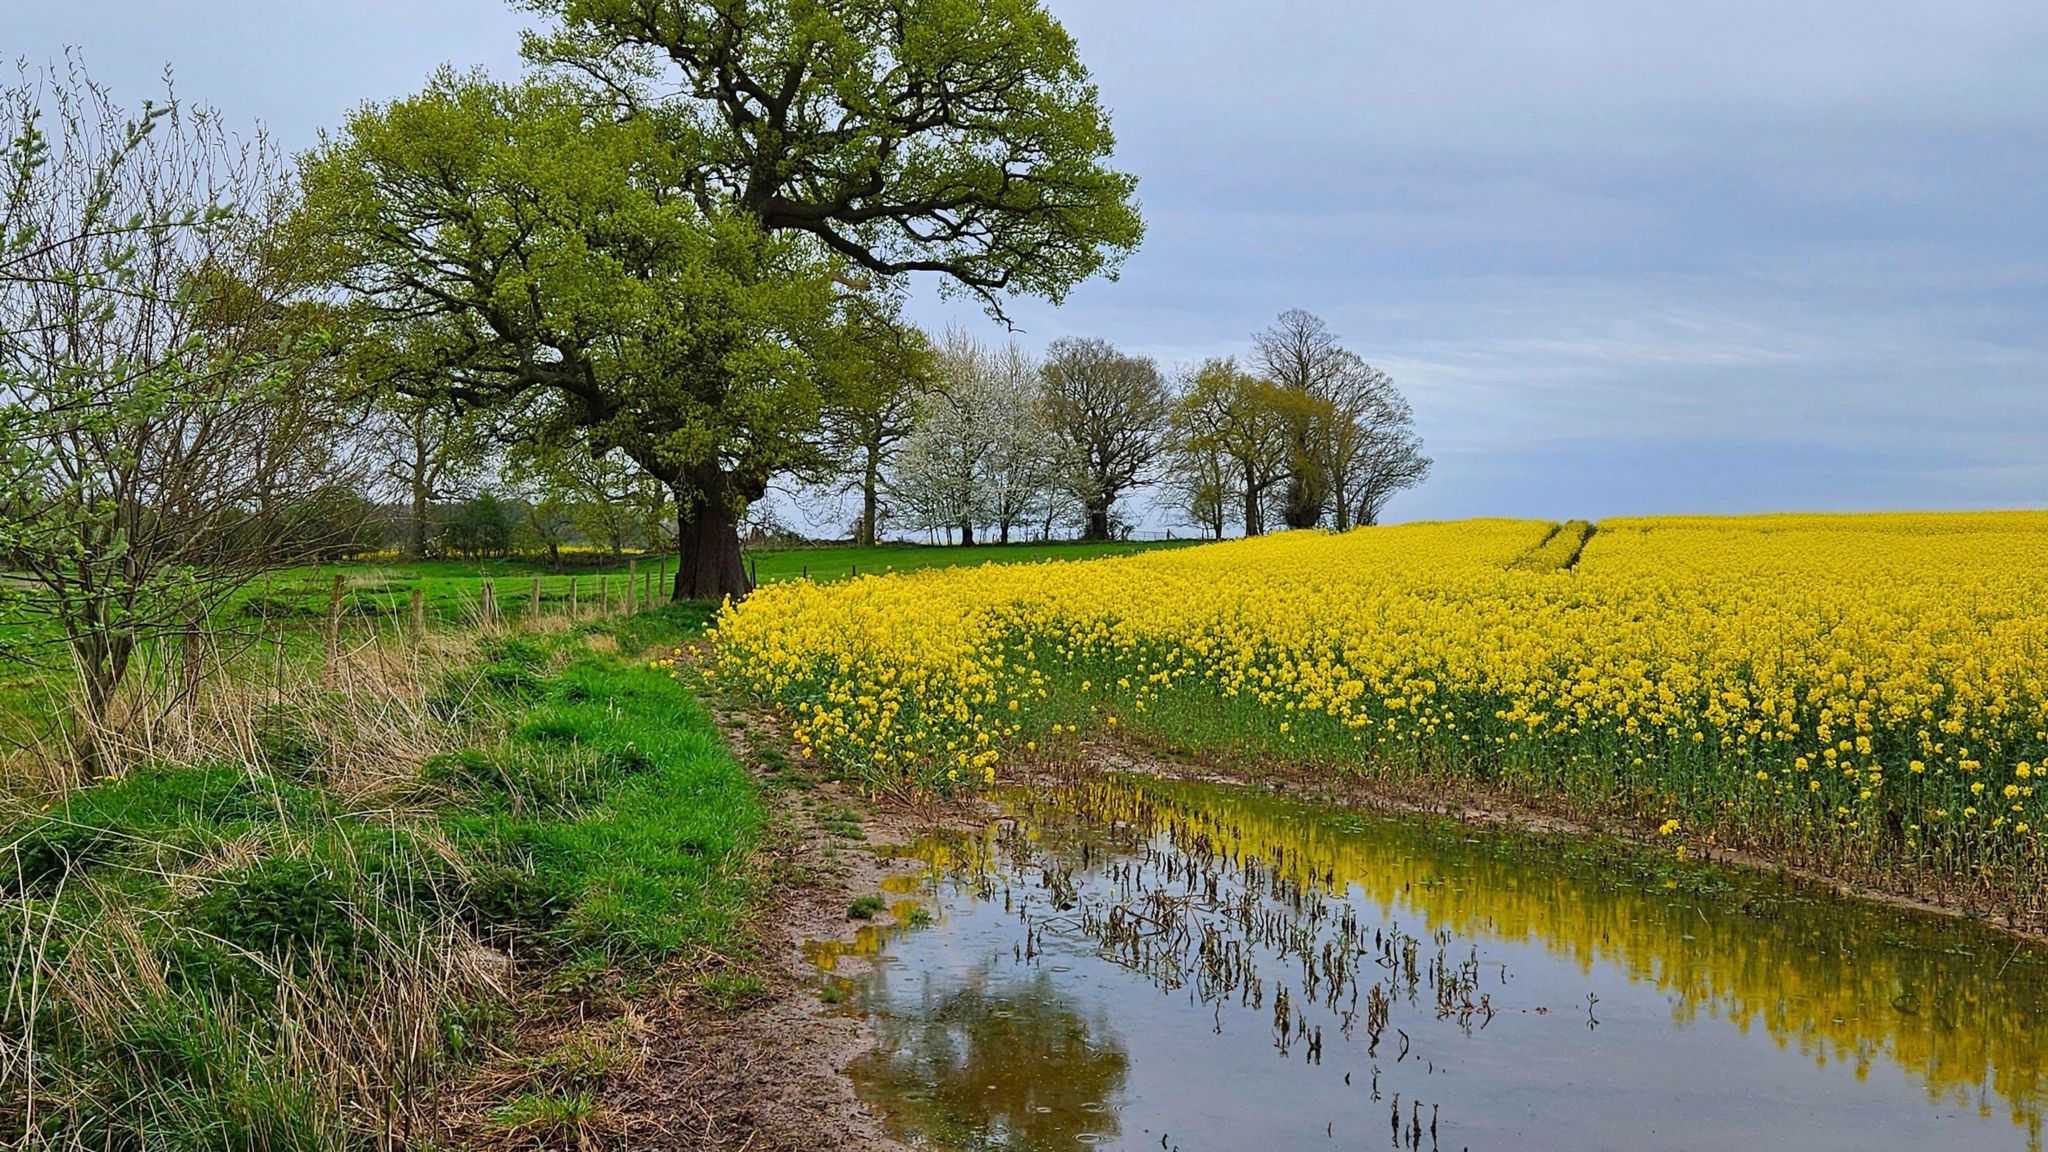 Flooded rapeseed field on a grey day